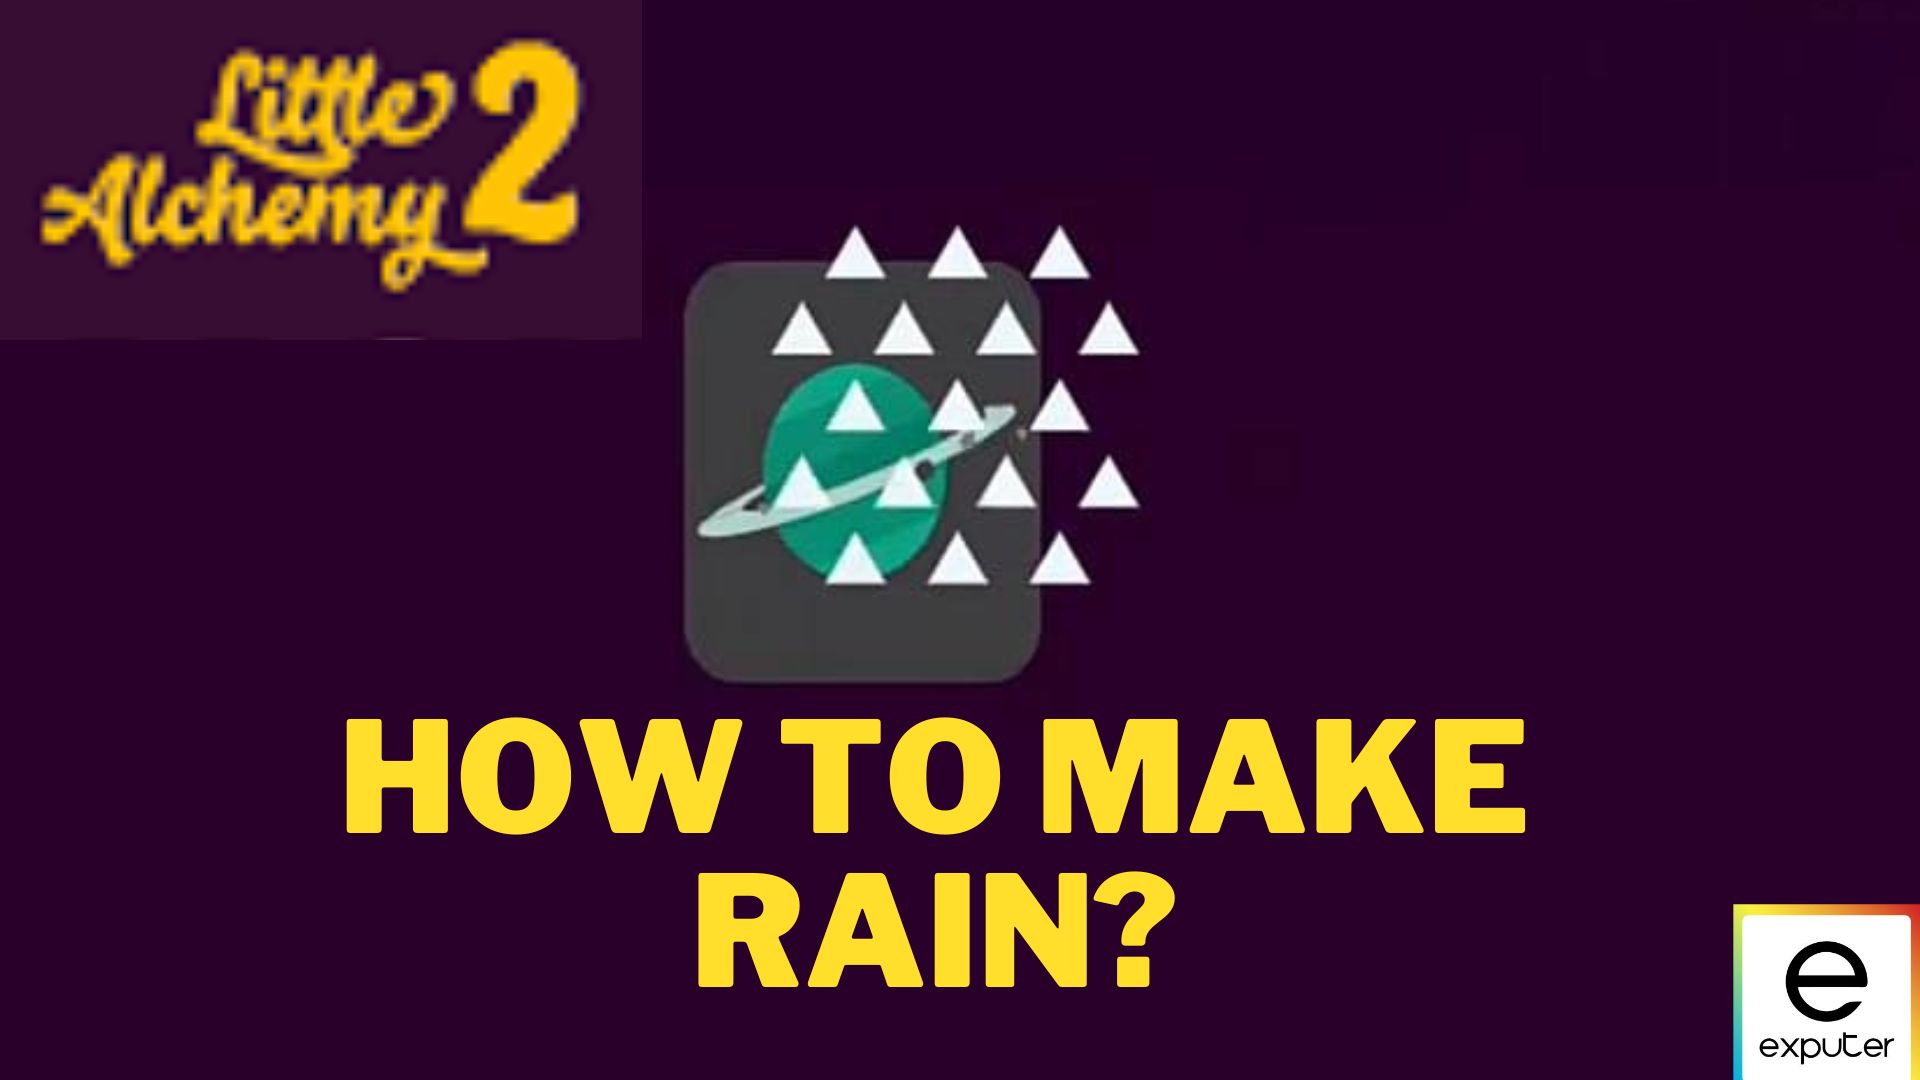 How to make acid rain - Little Alchemy 2 Official Hints and Cheats